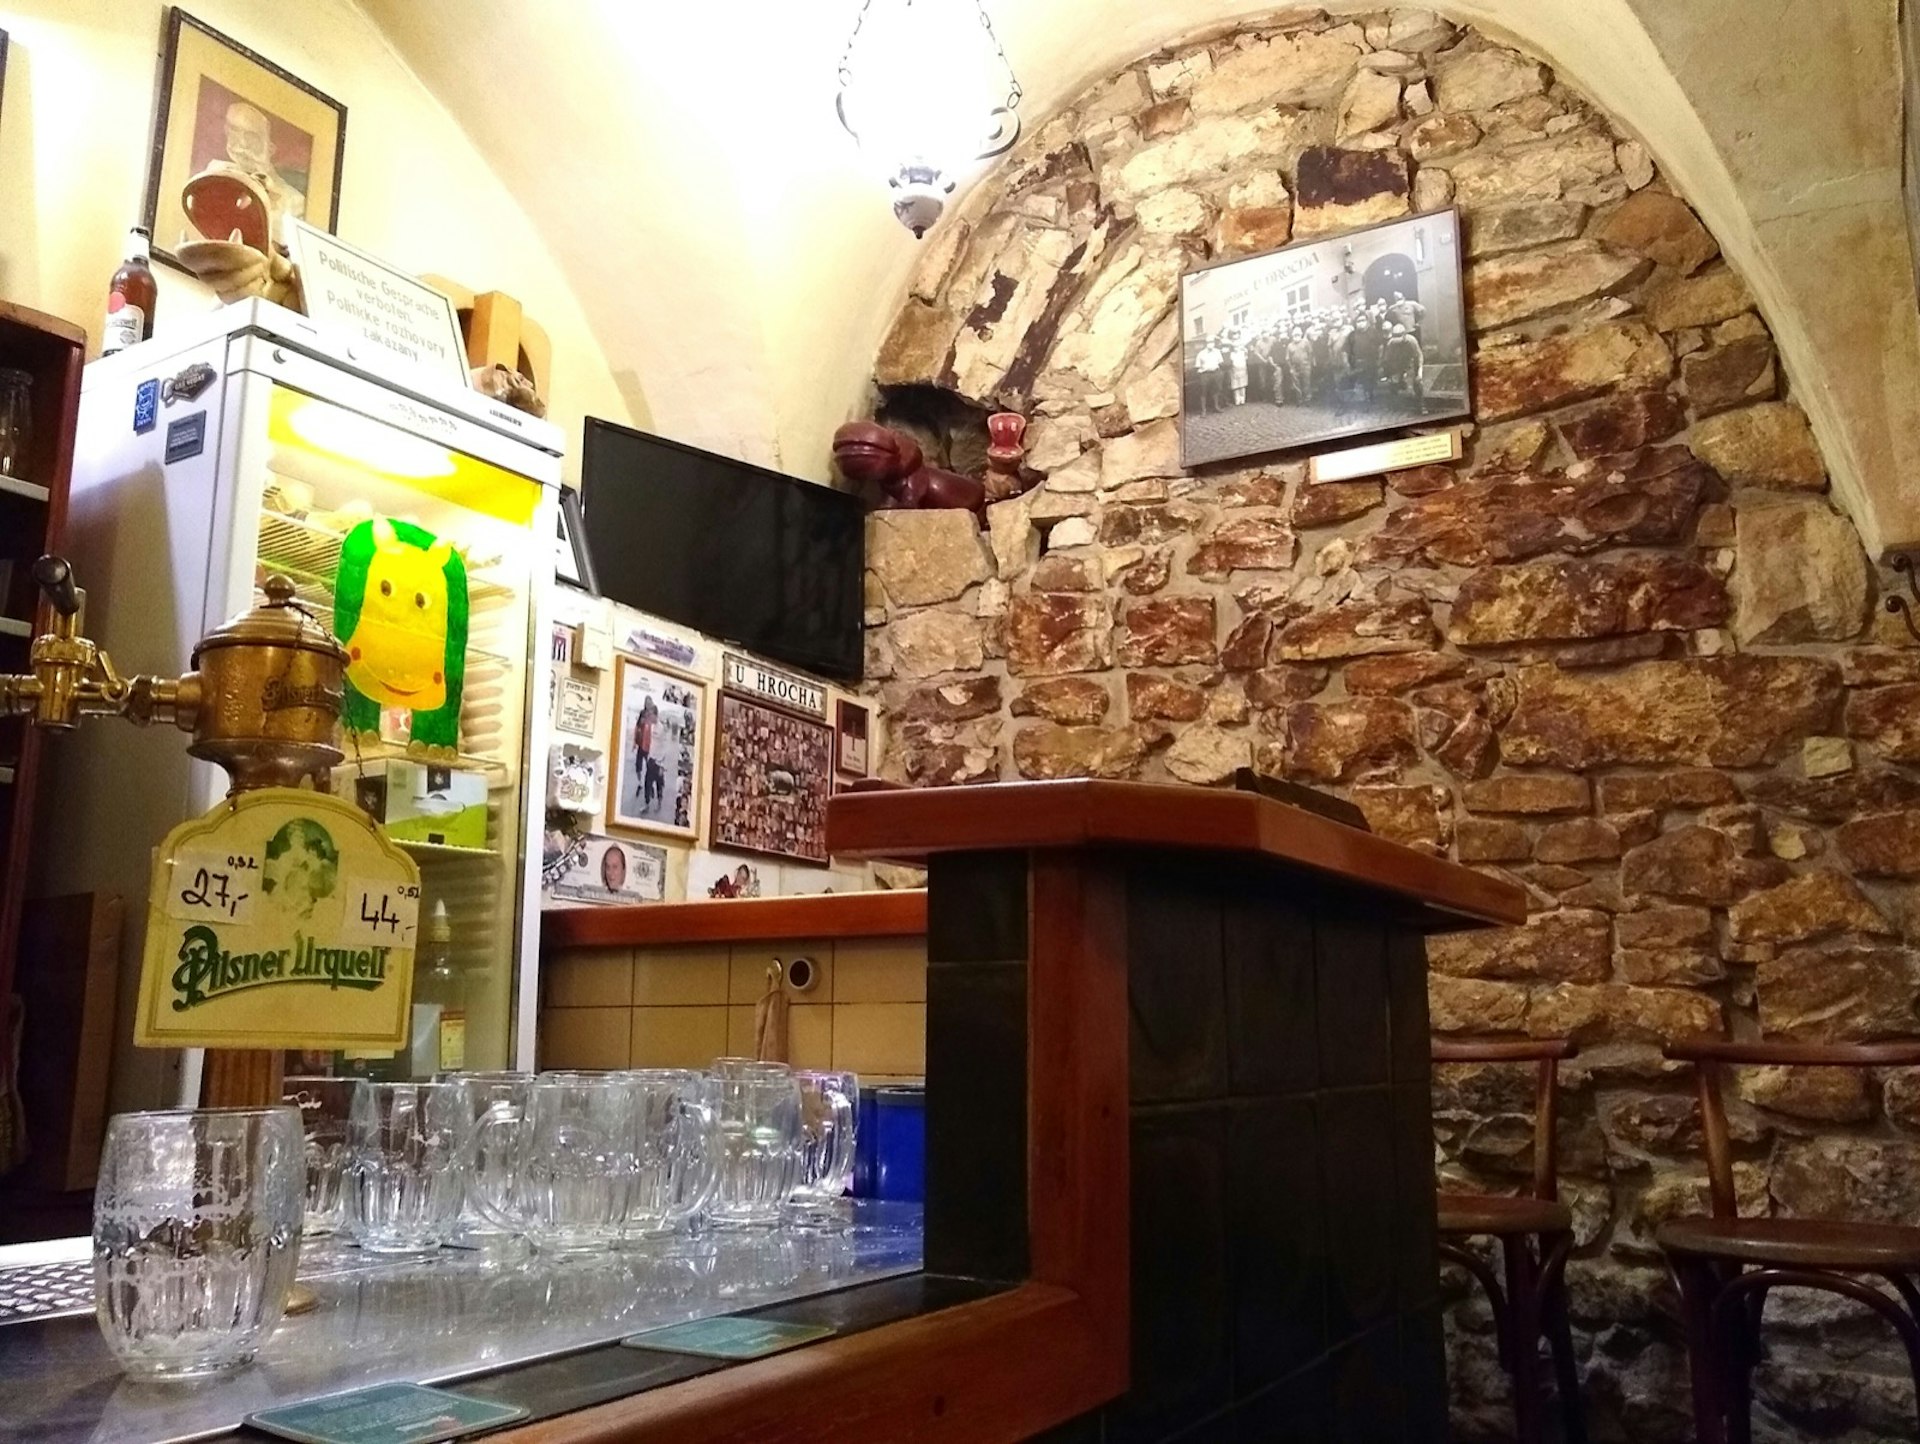 An arched stone wall marks an underground bar with an old brass tap and glass steins on the bar